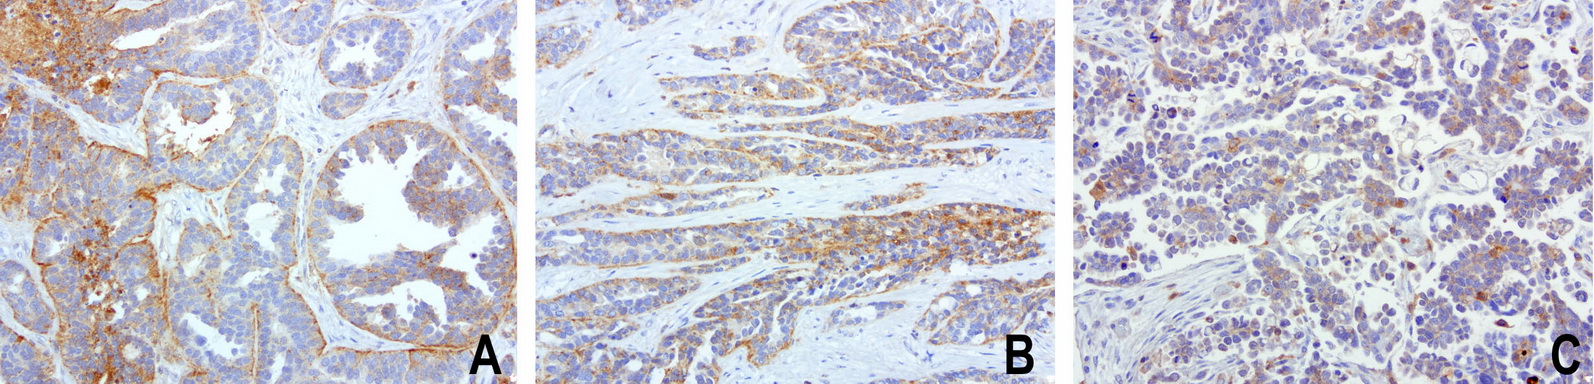 SDCBP / Syntenin Antibody - Immunohistochemical staining of paraffin-embedded composit of 3 human ovarian cancer cases using anti-SDCBP clone UMAB69 mouse monoclonal antibody  at 1:100 with Polink2 Broad HRP DAB detection kit; heat-induced epitope retrieval with GBI Citrate pH6.0 HIER buffer using pressure chamber for 3 minutes at 110C. Membrane and cytoplasmic staining is seen in tumor cells with various intensity.